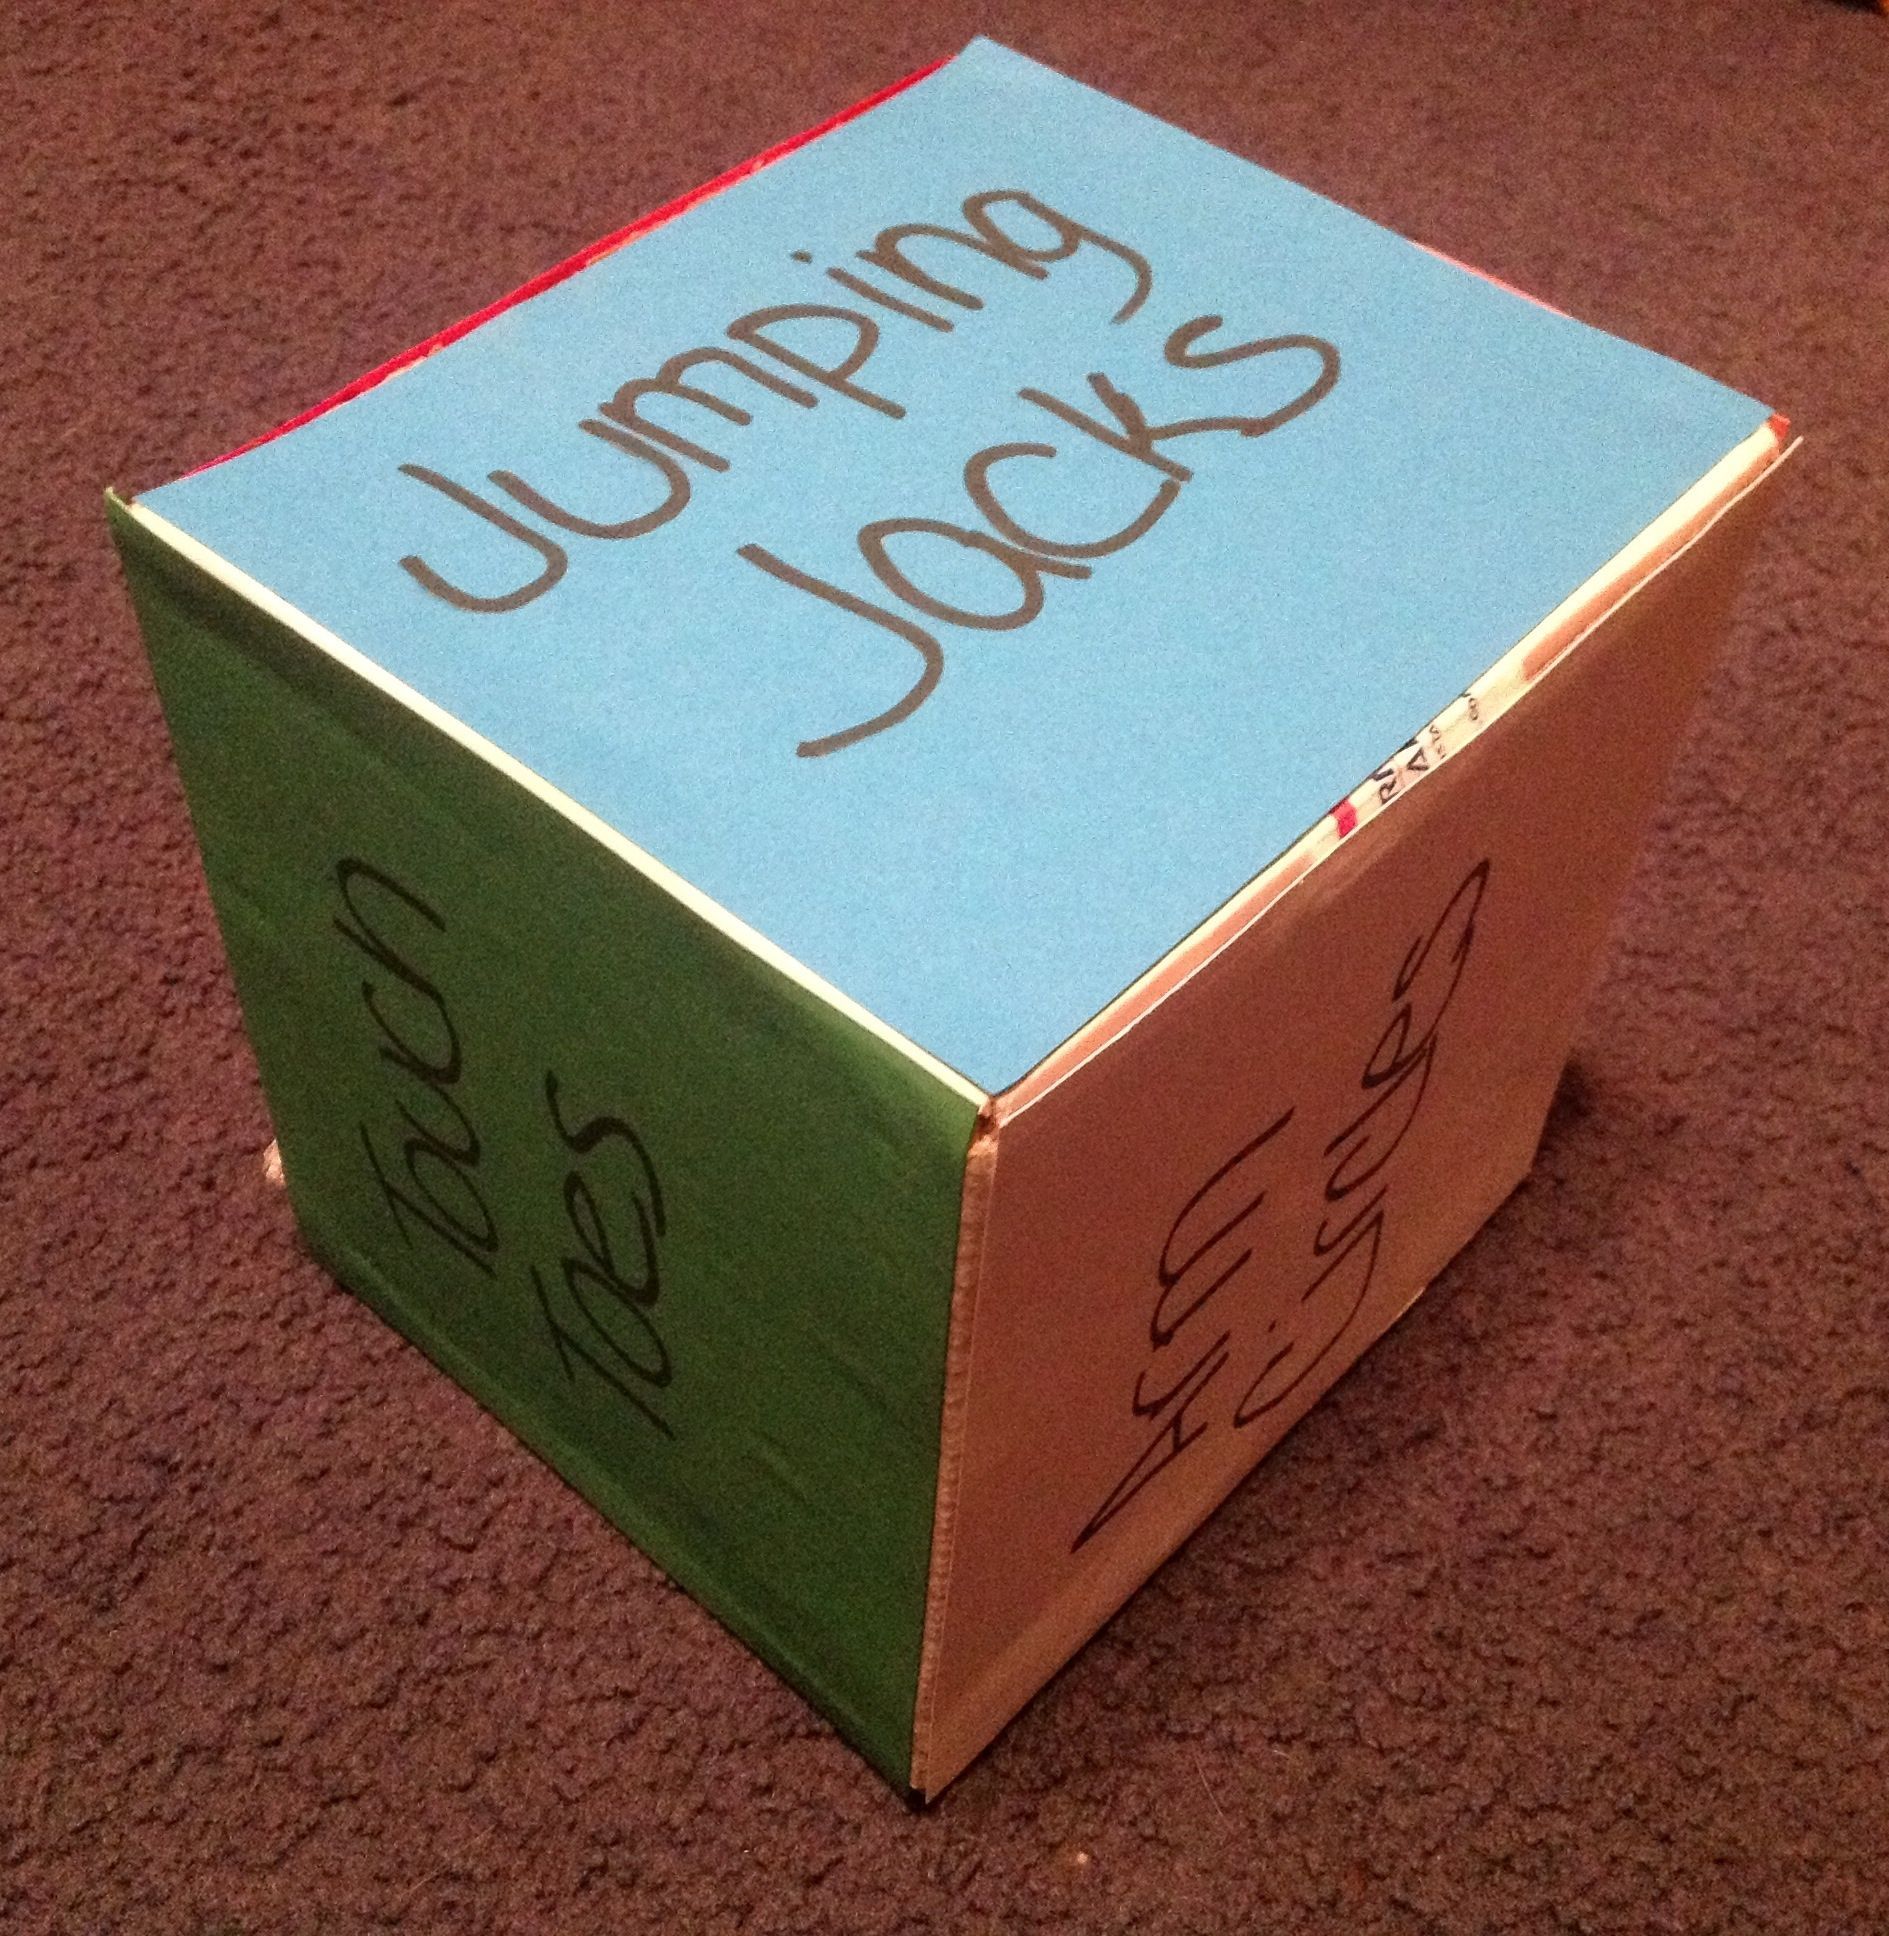 Activity Cube for Preschoolers – Super fun way to introduce exercise to your little